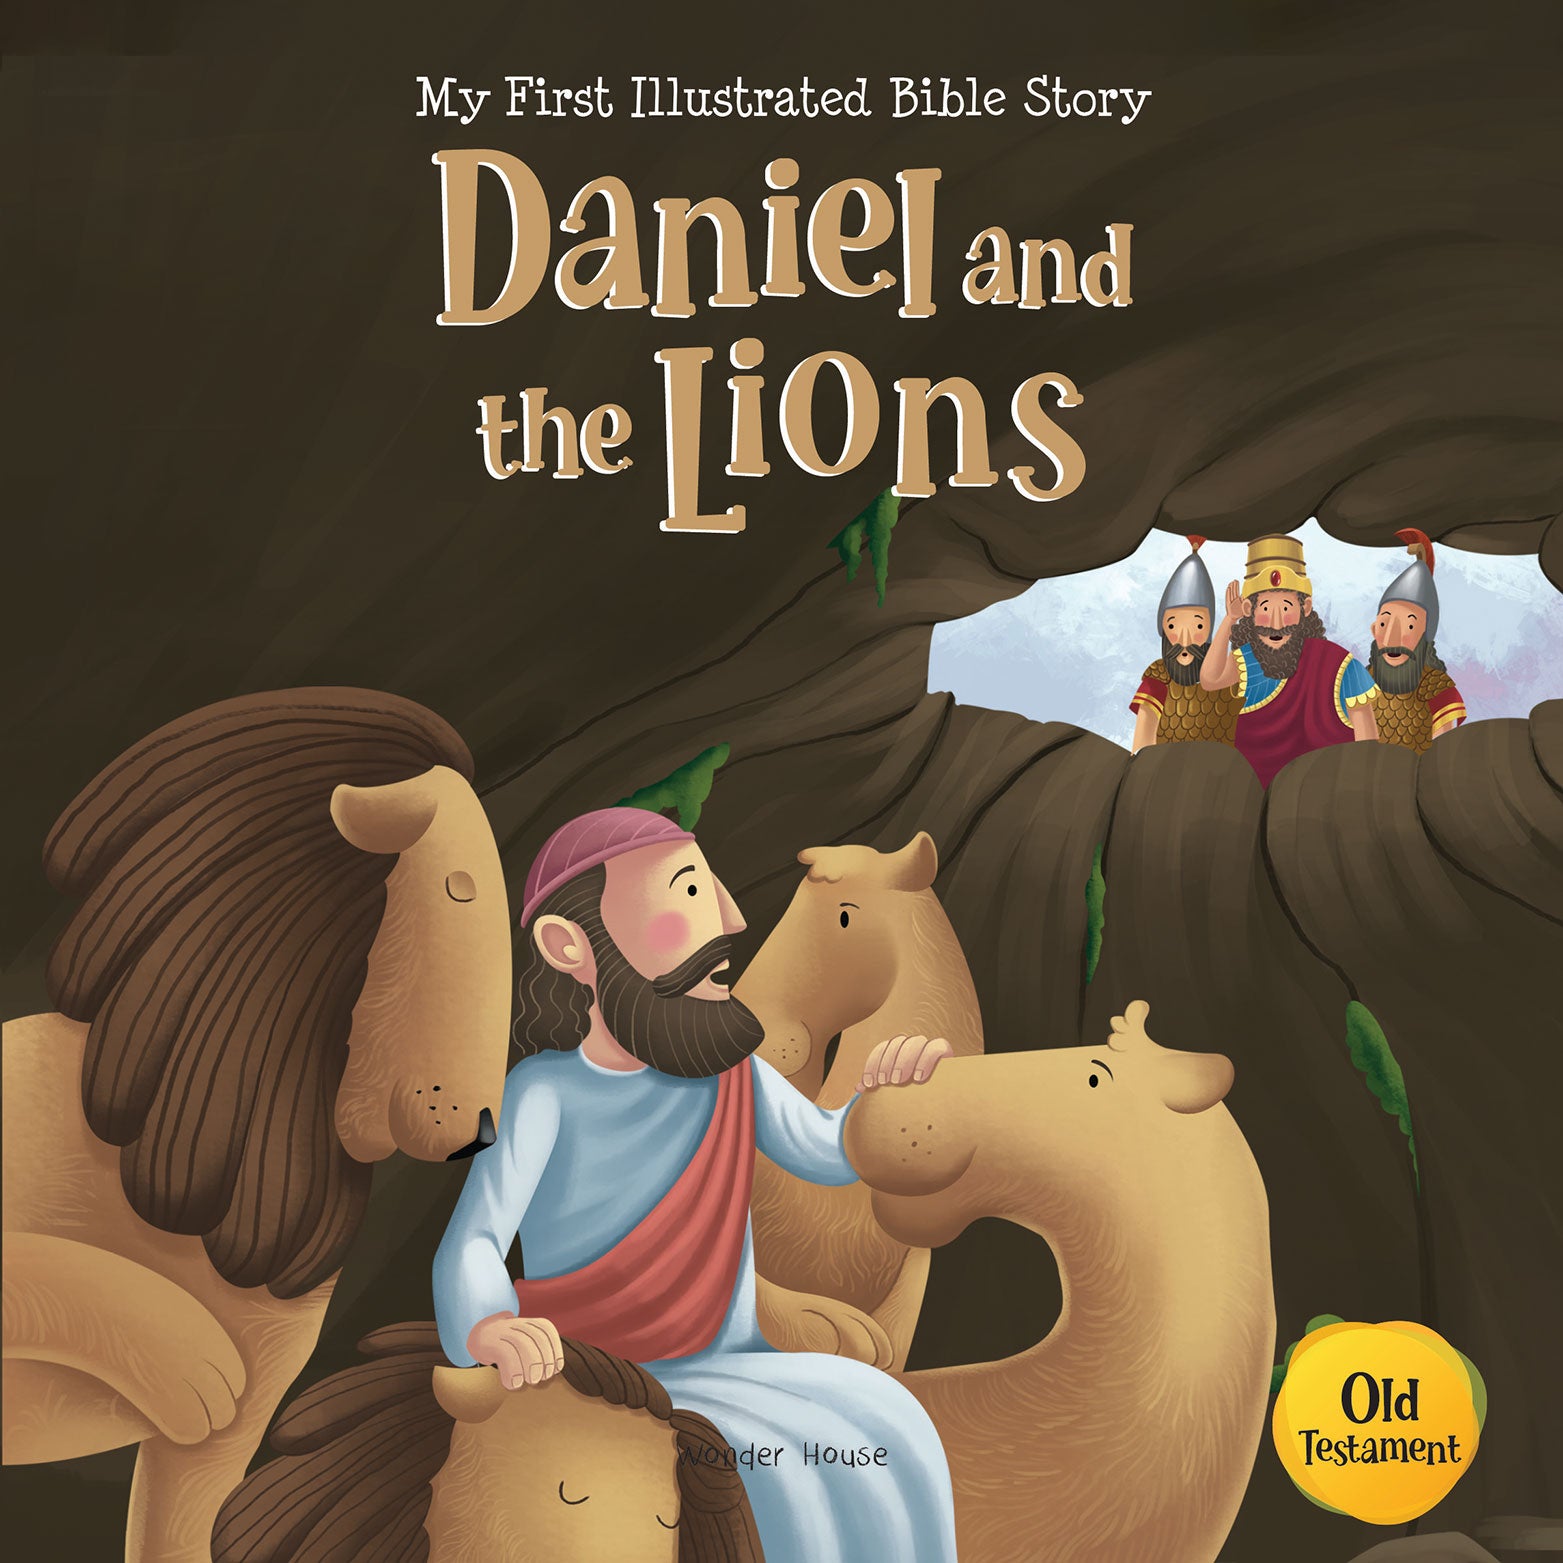 My First Illustrated Bible Story: Daniel and the Lions